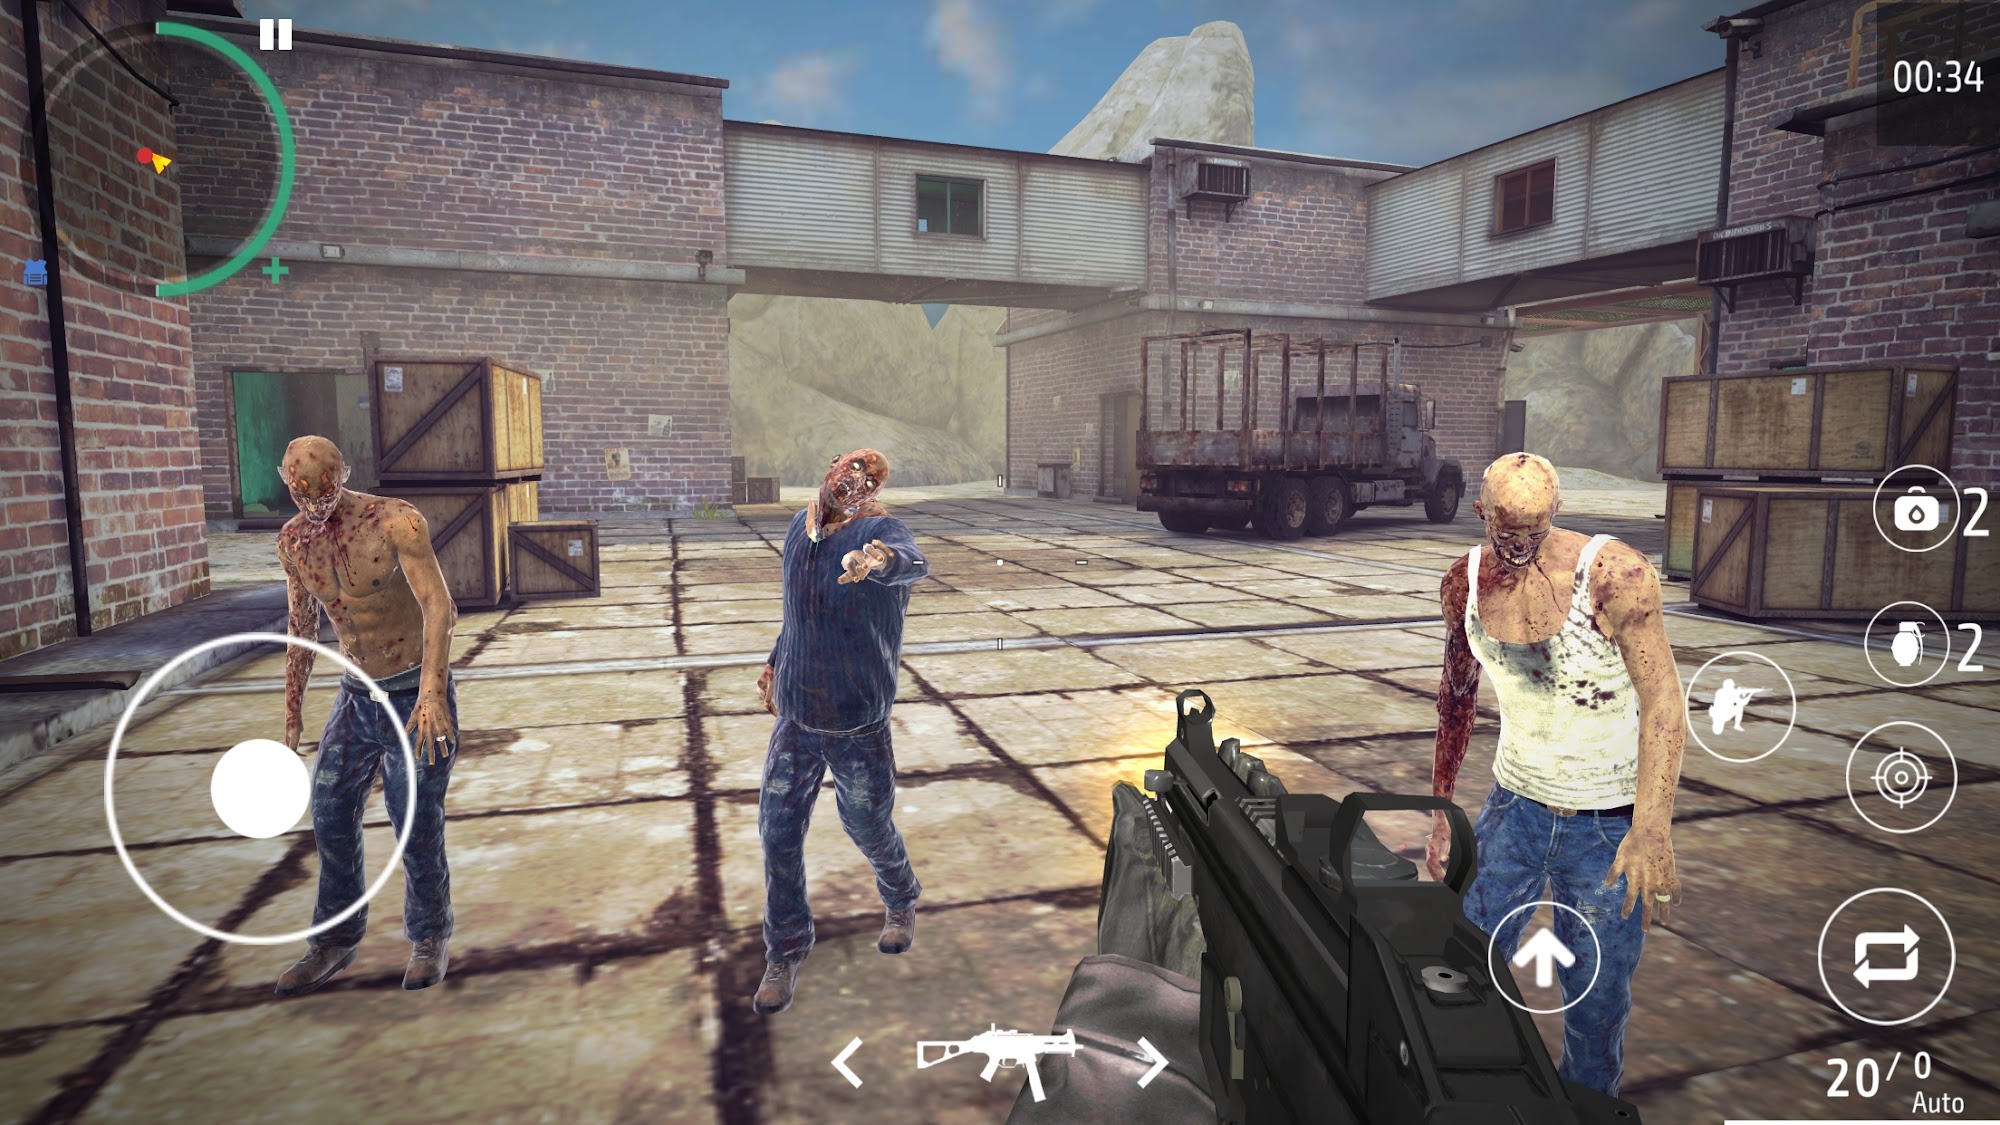 Scarica Zombie Shooter - fps games gratis per Android.